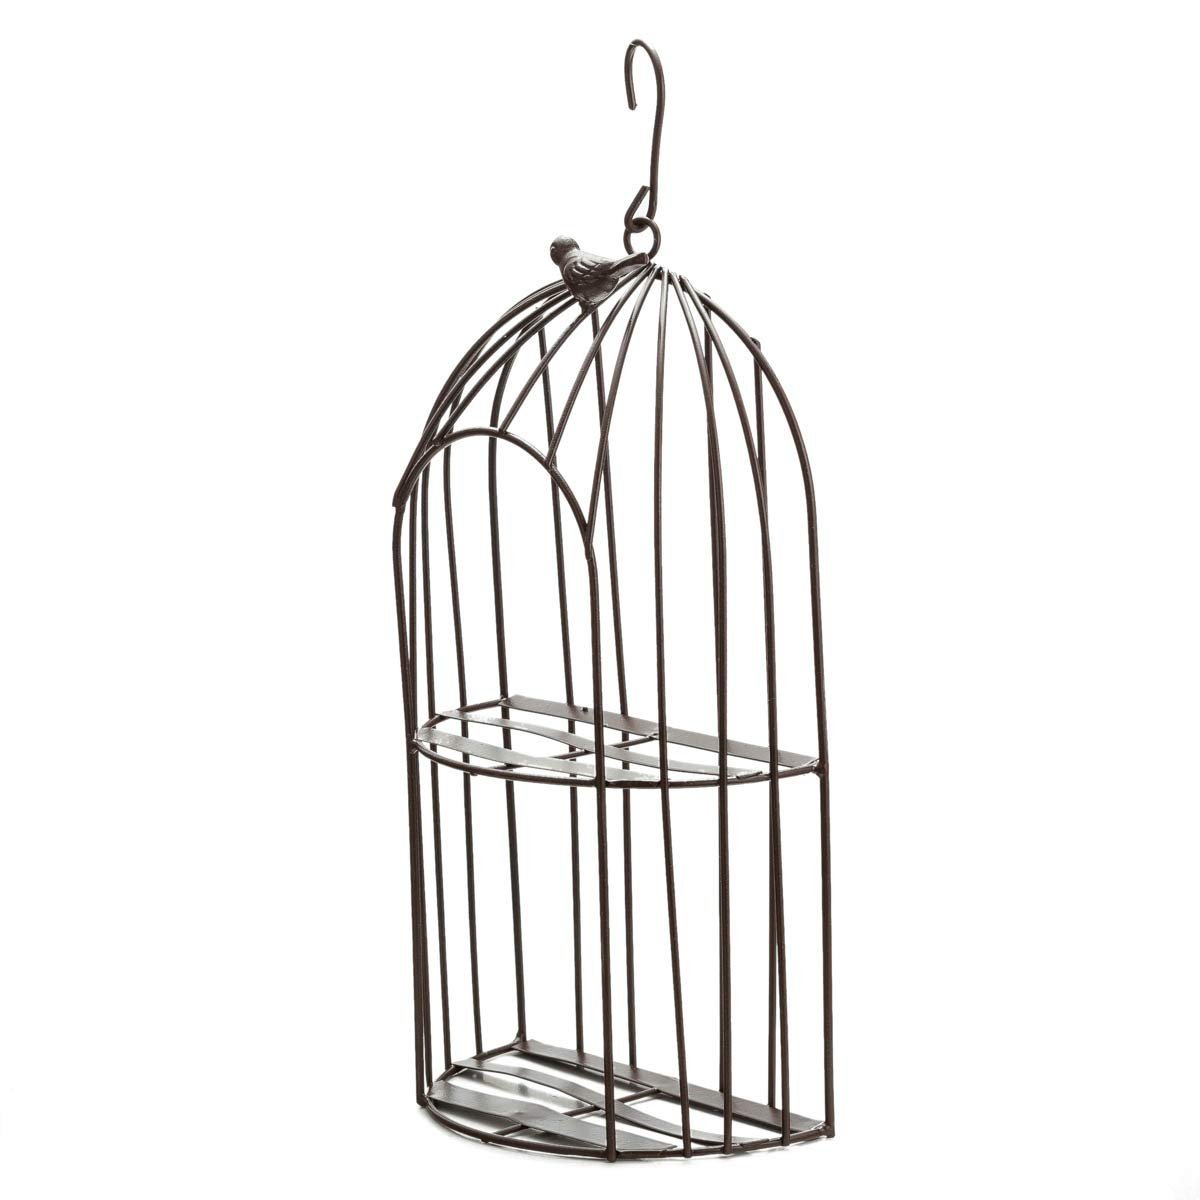 TJ Global 2-Plant Iron Birdcage Hanging Planter, Metal Wire Flower Pot Basket Wrought Iron Plant Stands for Plants, Flowers, Garden, Patio, Balcony Outdoor and Indoor Dcor - image 4 of 6